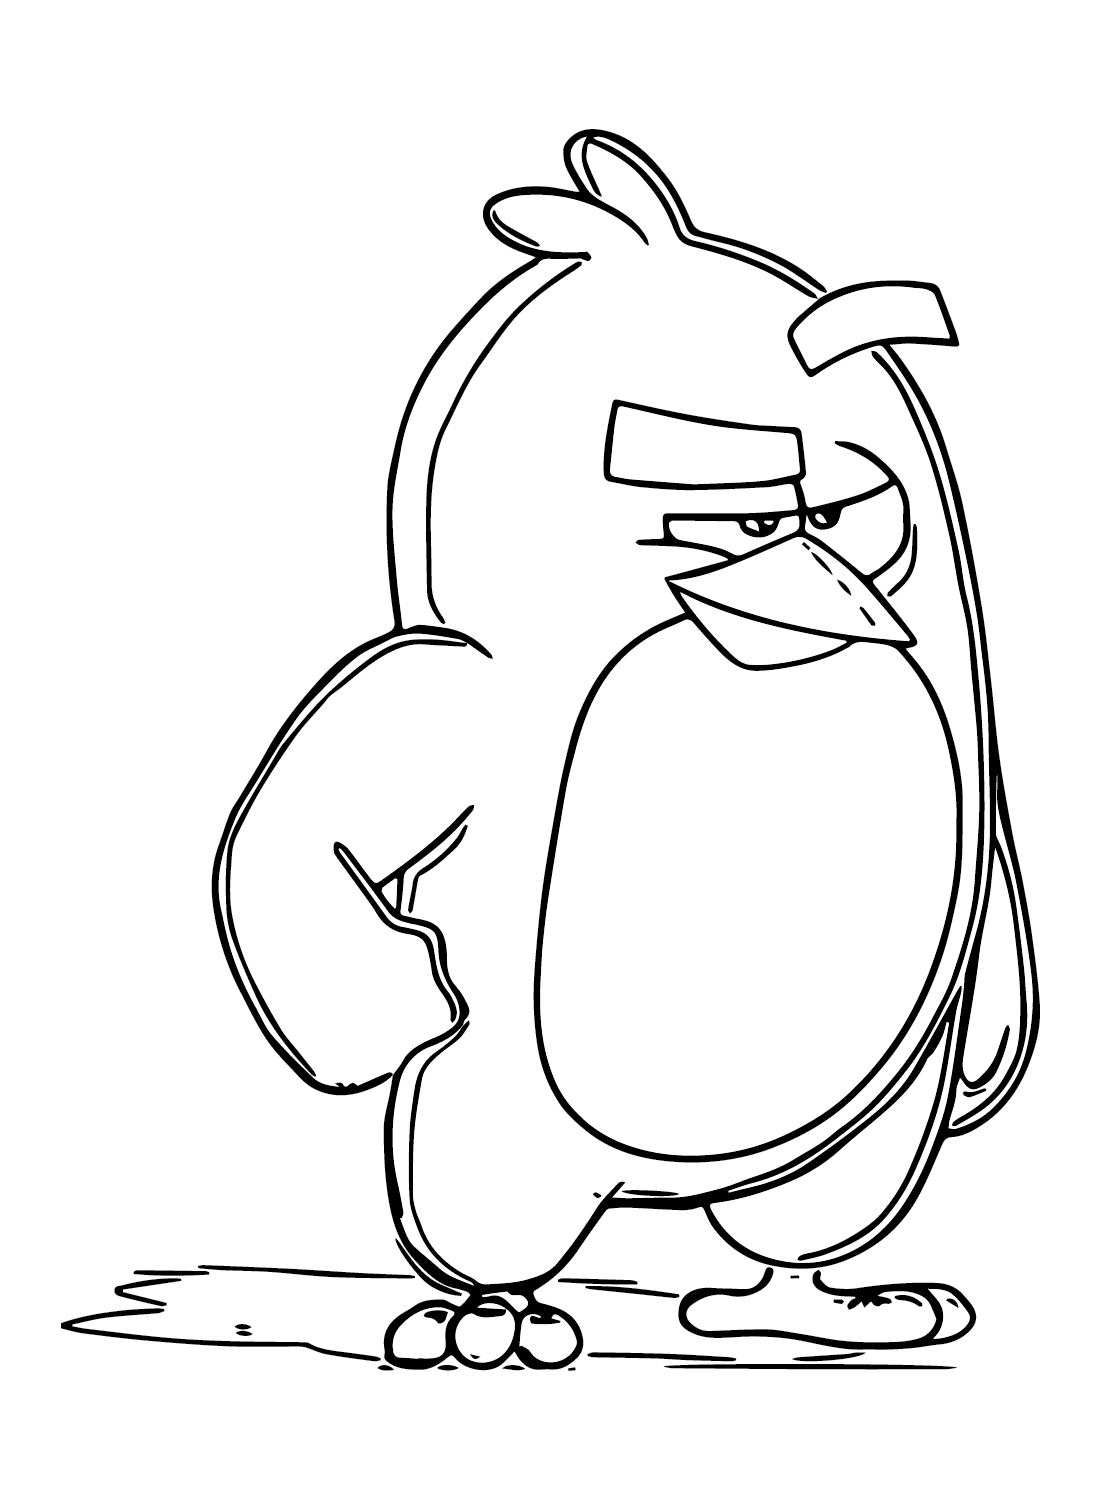 angry birds mighty eagle coloring pages